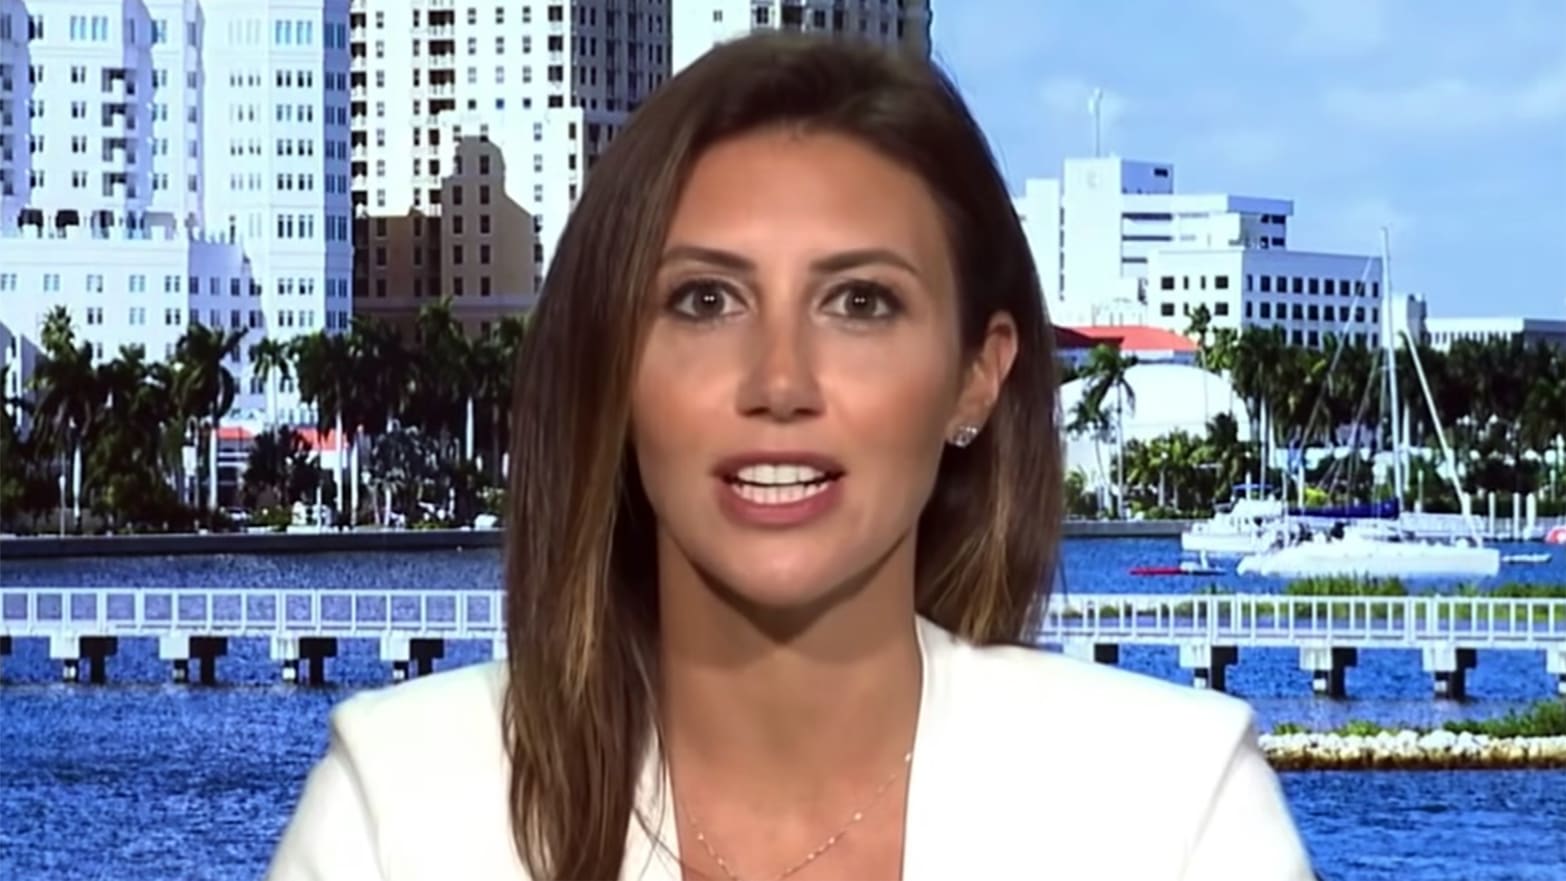 Donald Trumps Defense Lawyer Alina Habba Sued by Employee for Allegedly Yelling N-word picture